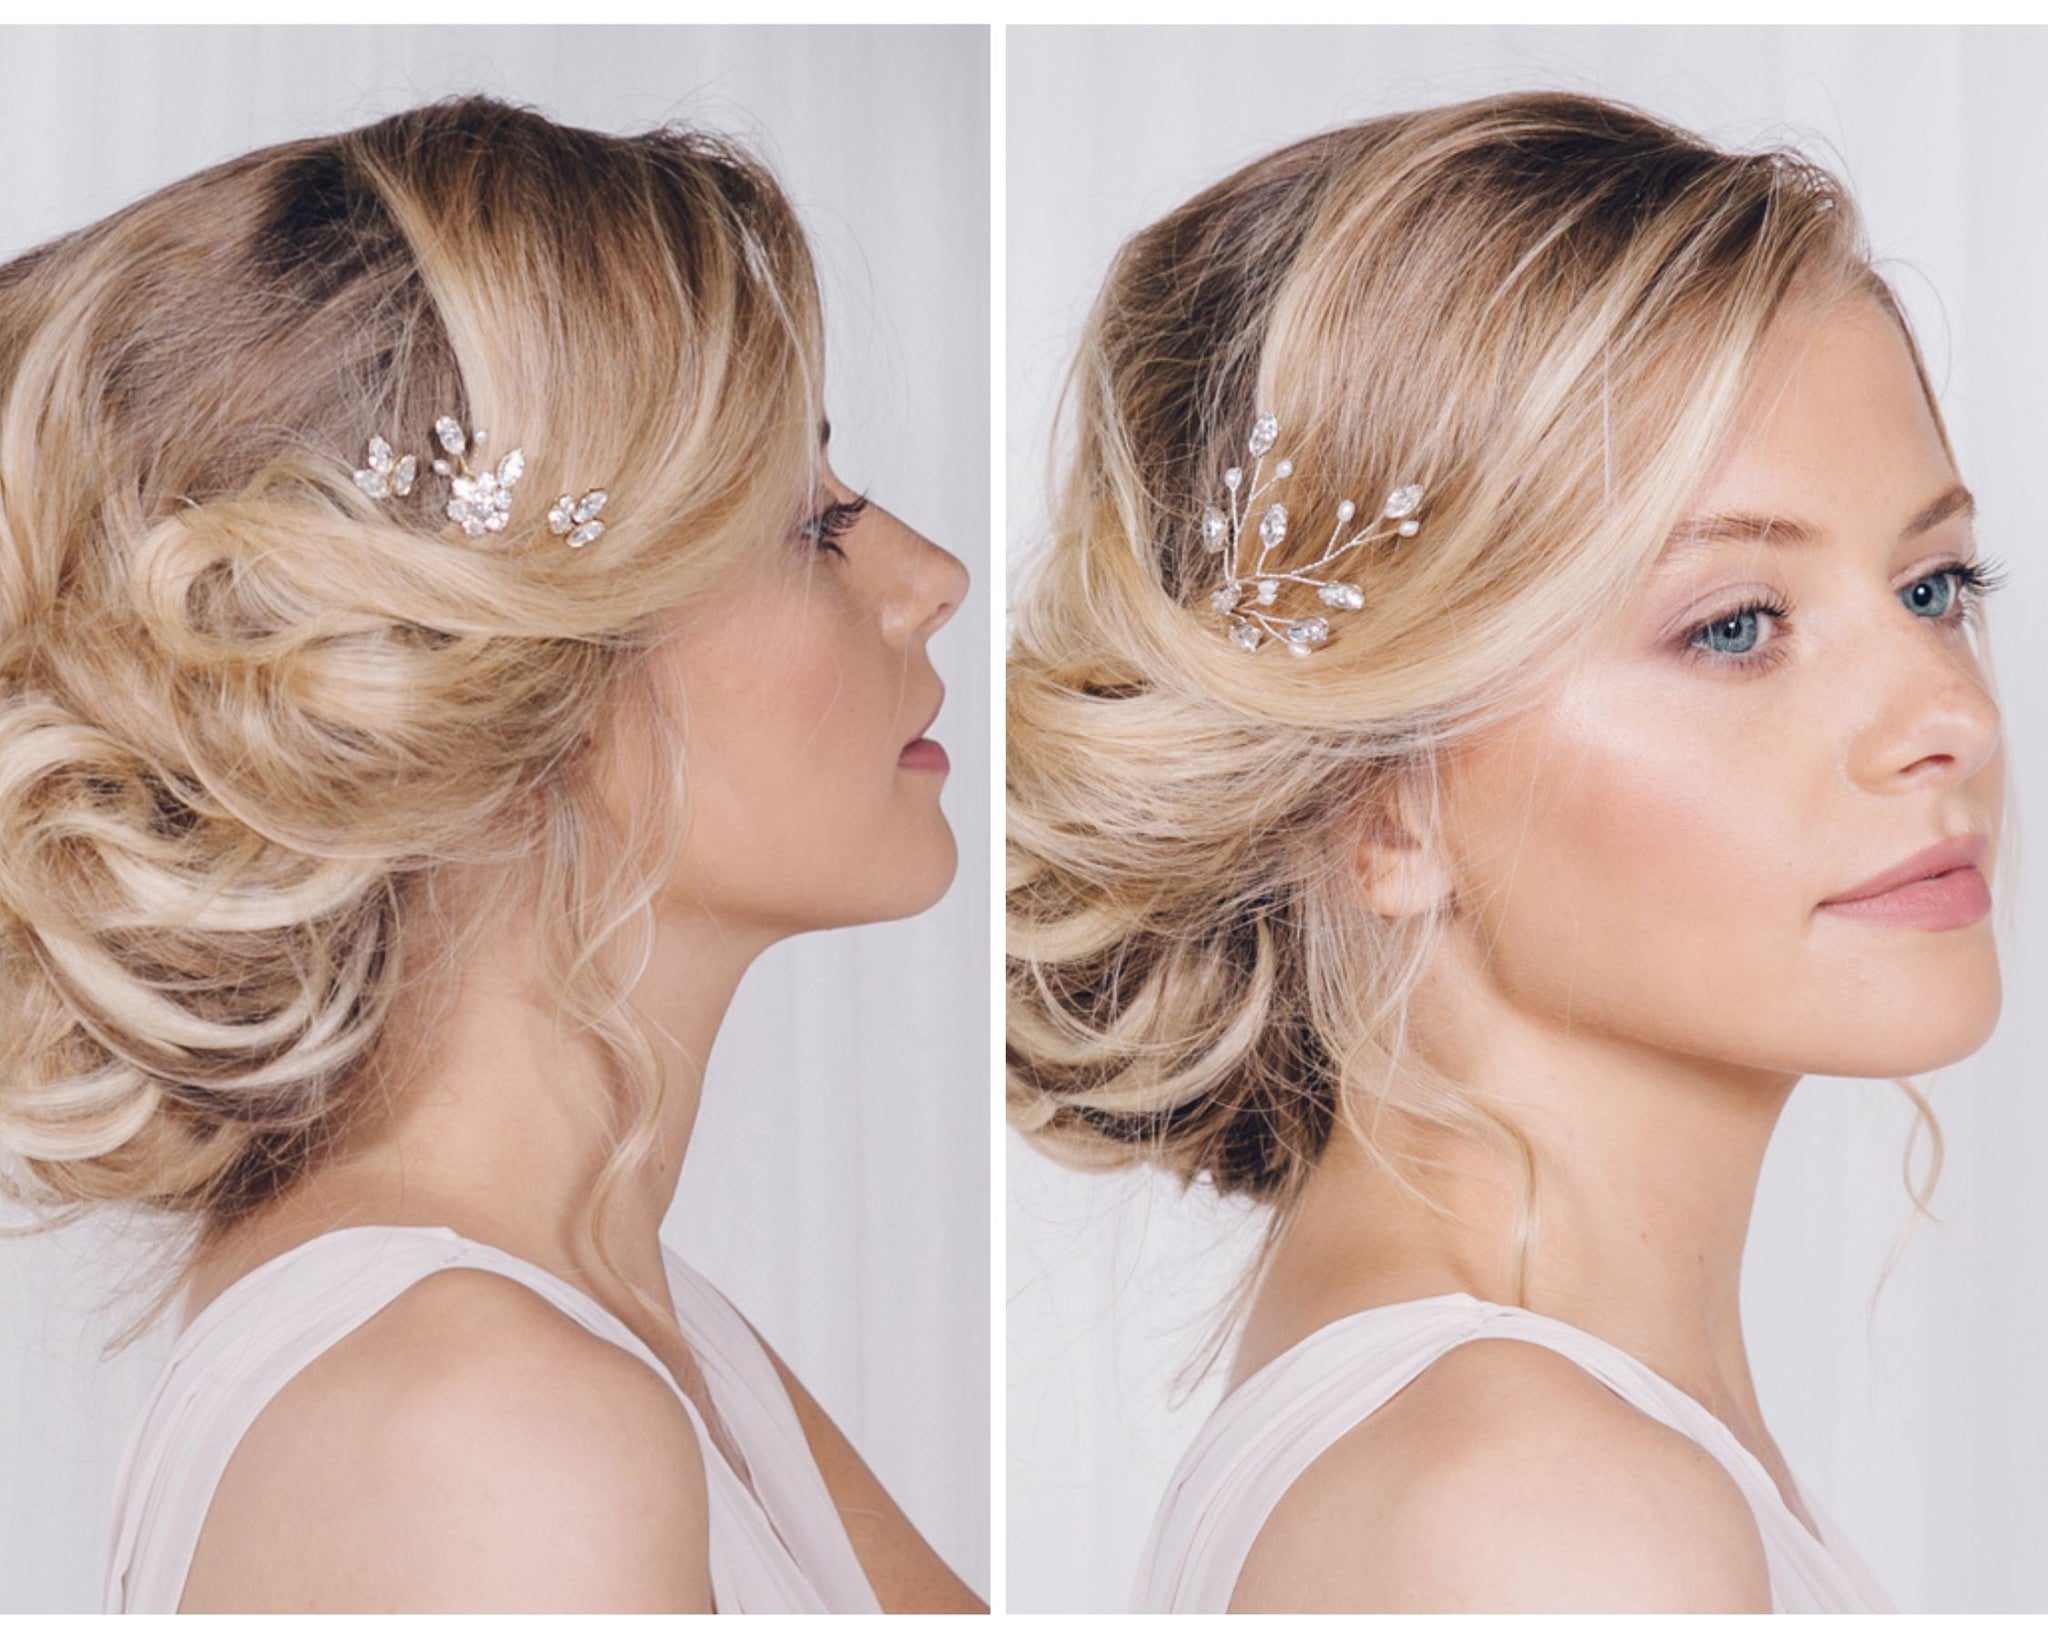 Crystal wedding hairpins - small and large sized with flowers and leaf sheaped crystals